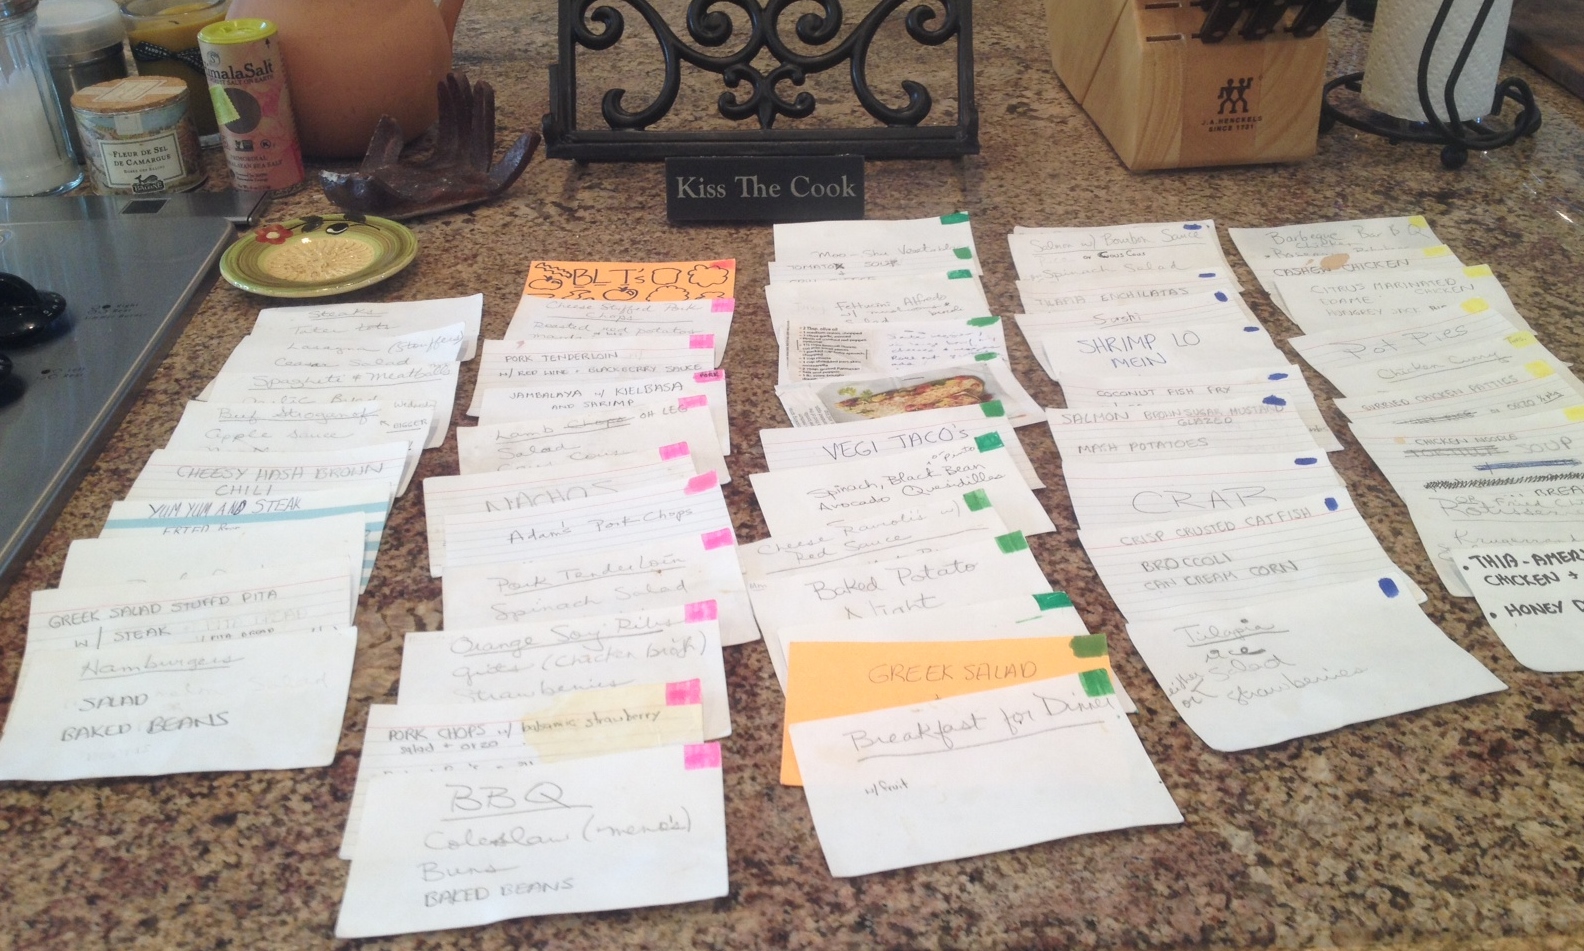 Meal Planning Made Easy with My Friend, Katherine Macon's organizer